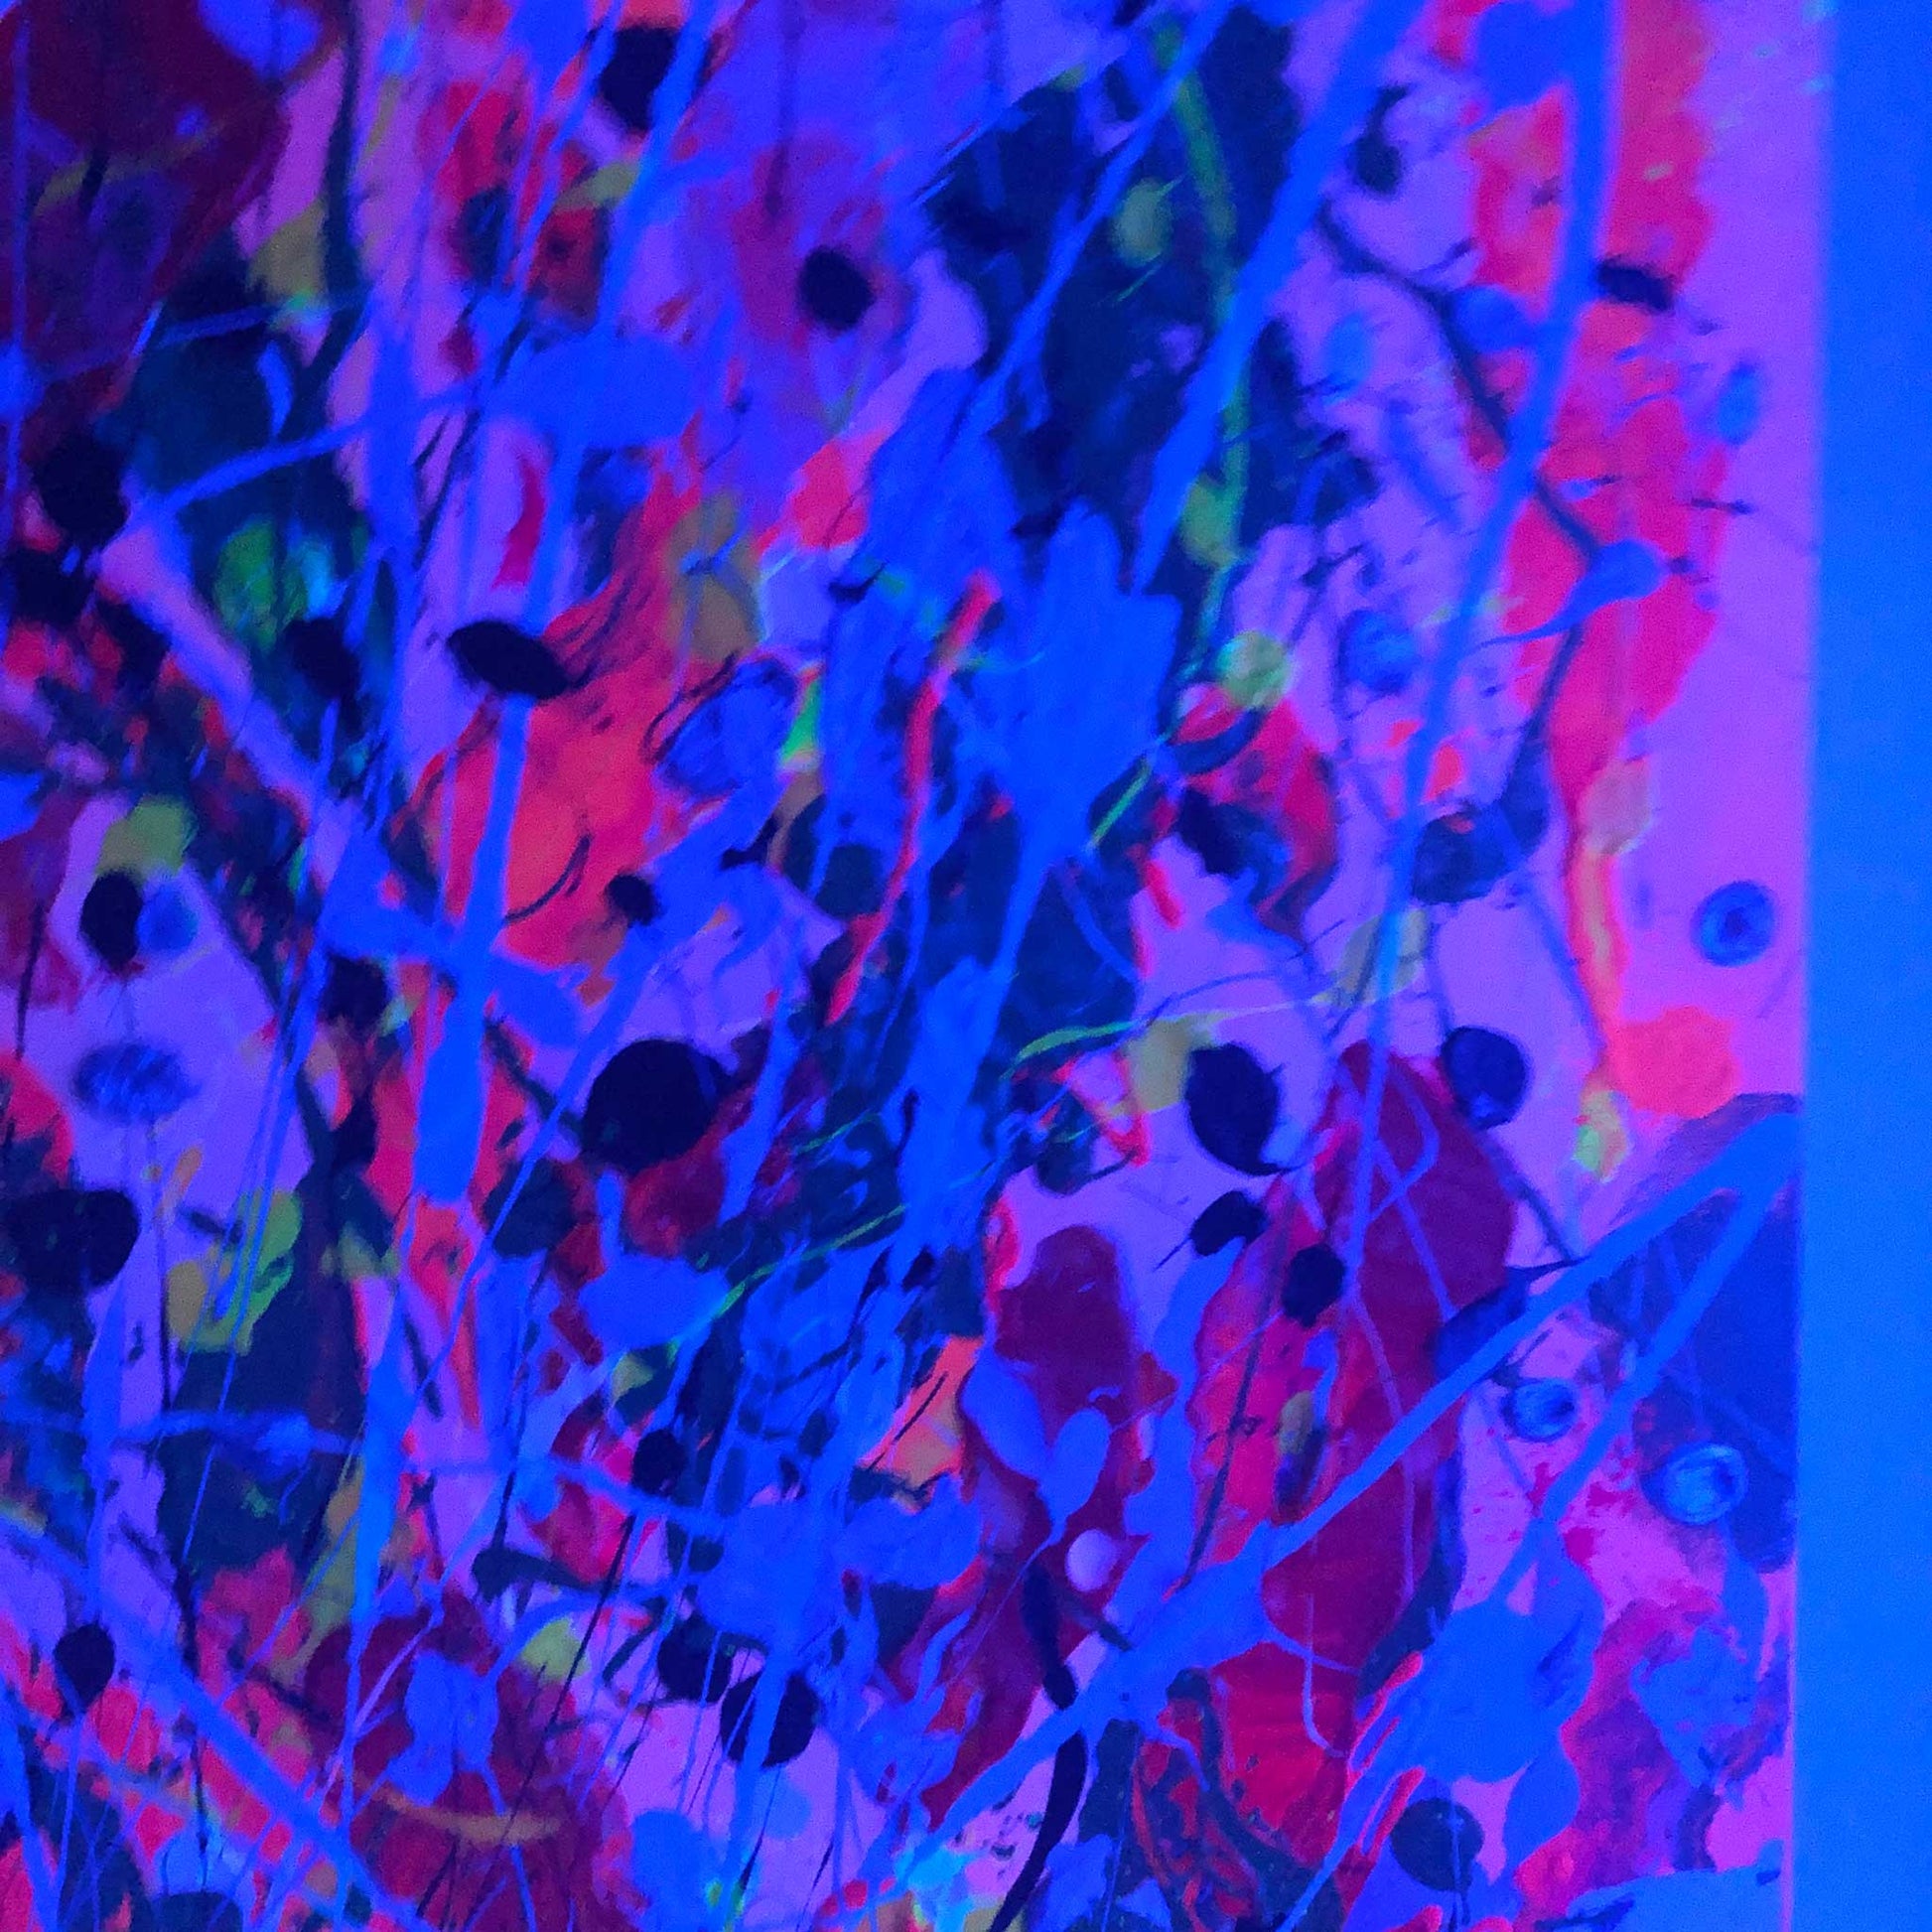 Part of the 'Alive' original painting seen glowing at night. Abstract, acrylic artwork by Bridget Bradley